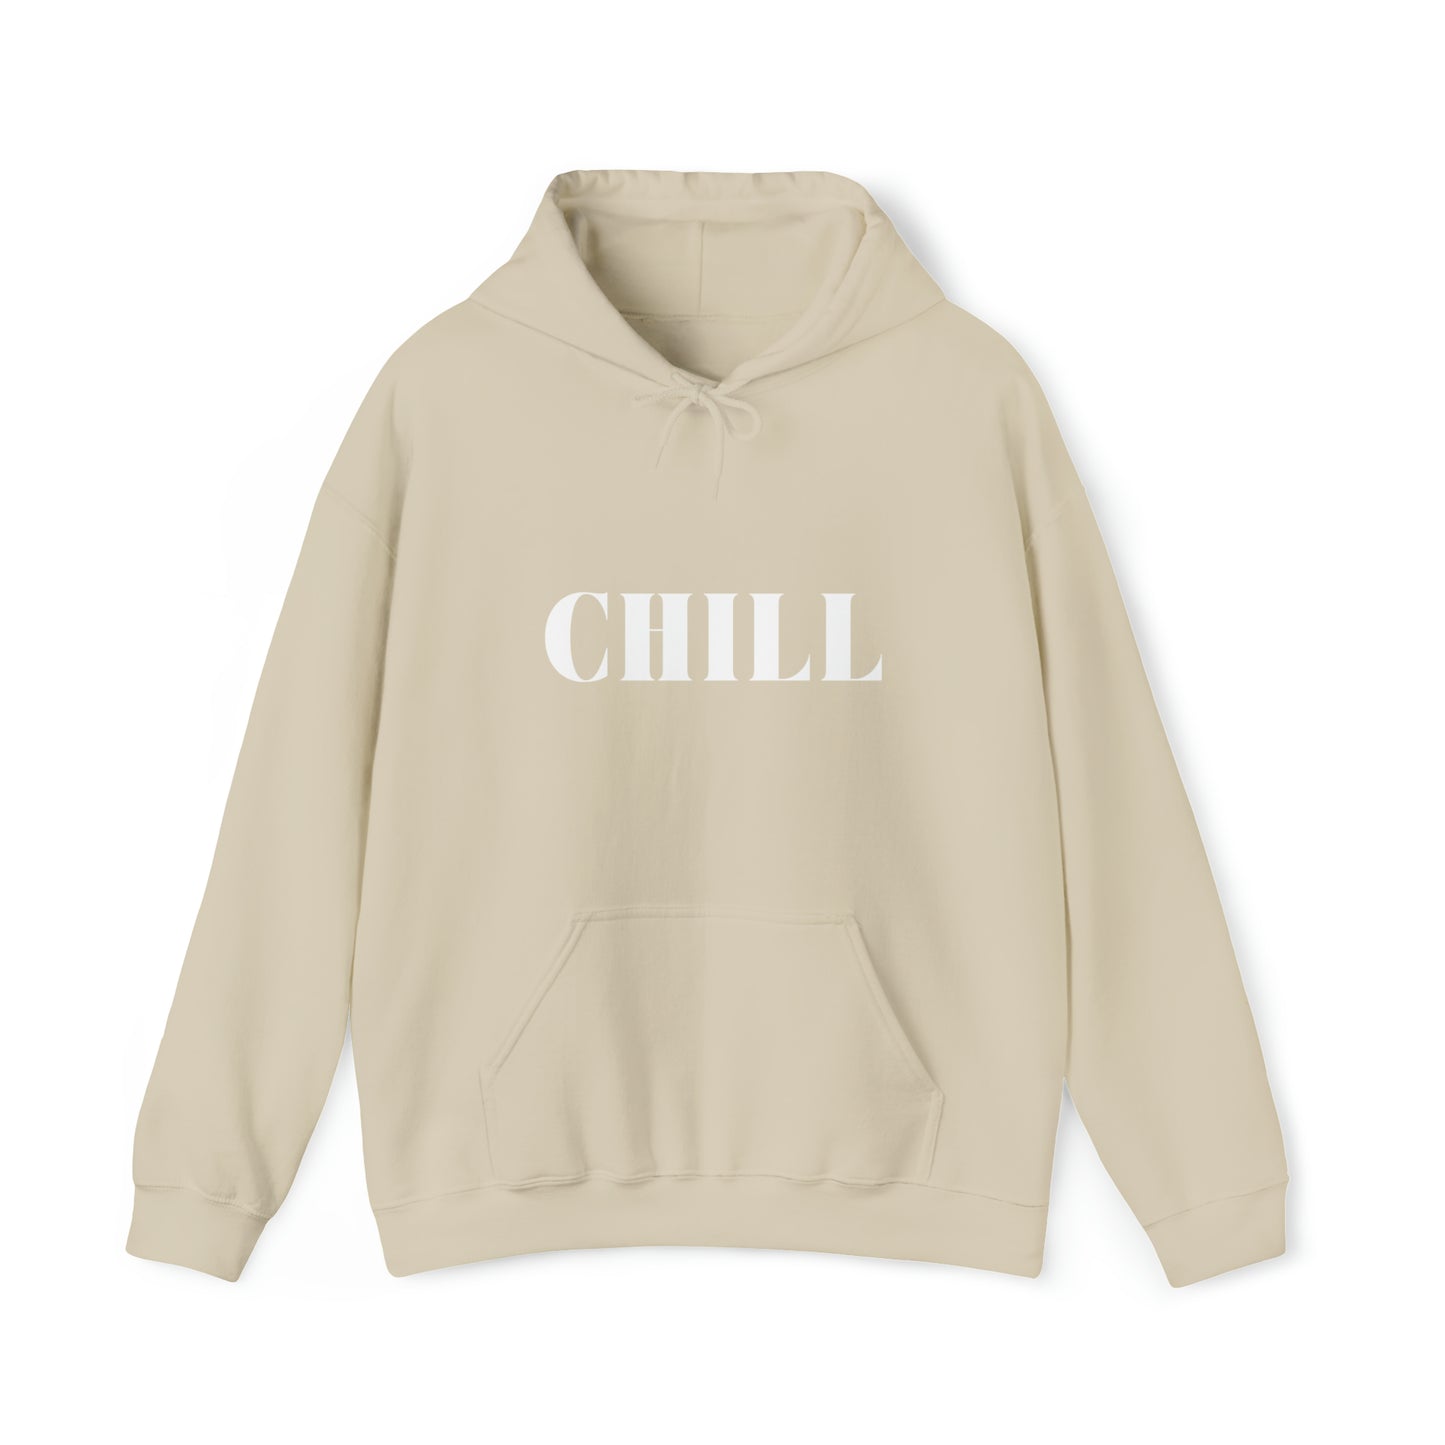 S Sand Chill Hoodie from HoodySZN.com